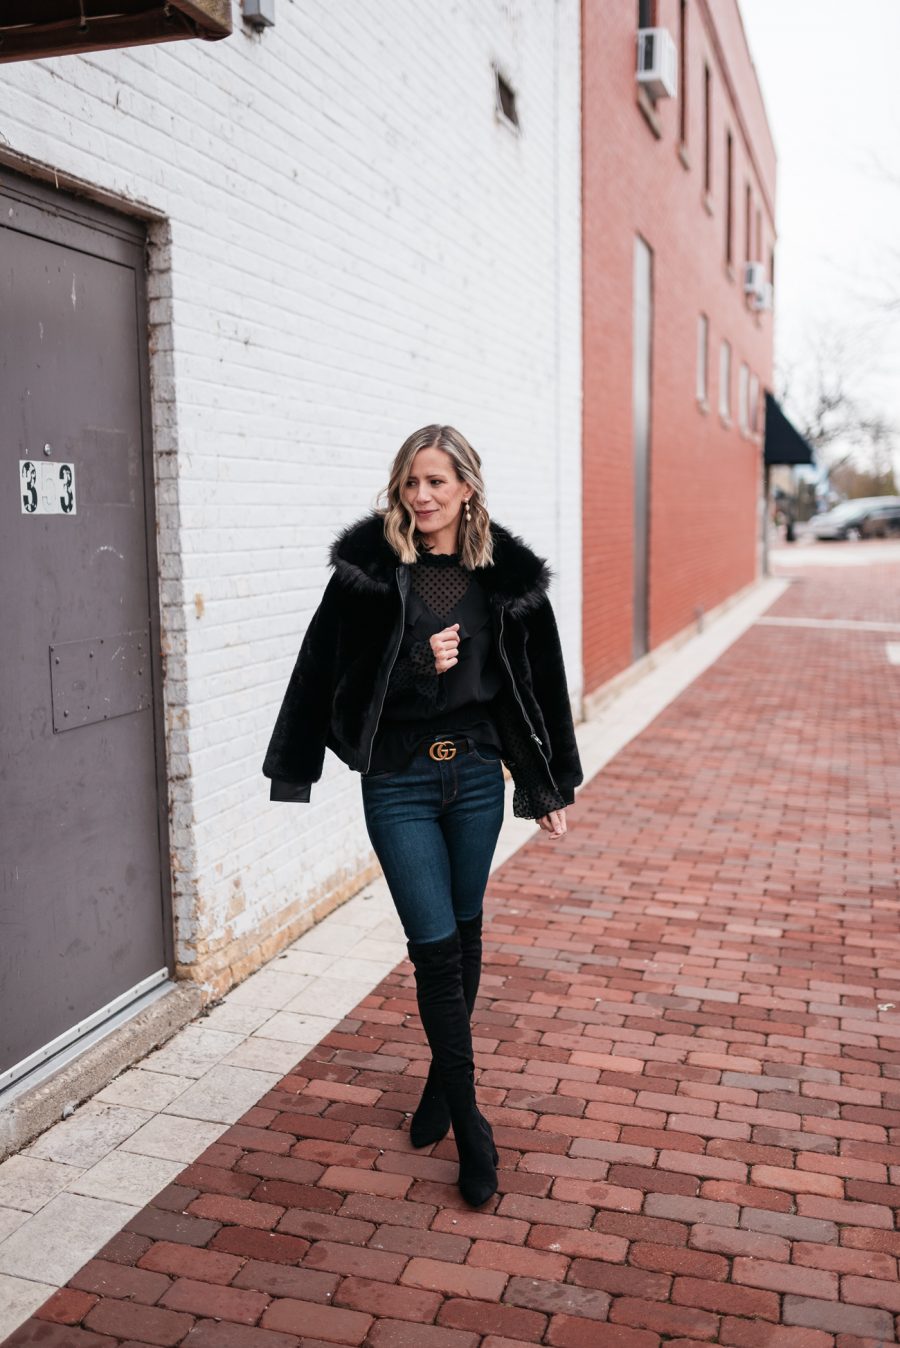 Faux fur jacket, black blouse, skinny jeans, and over the knee boots